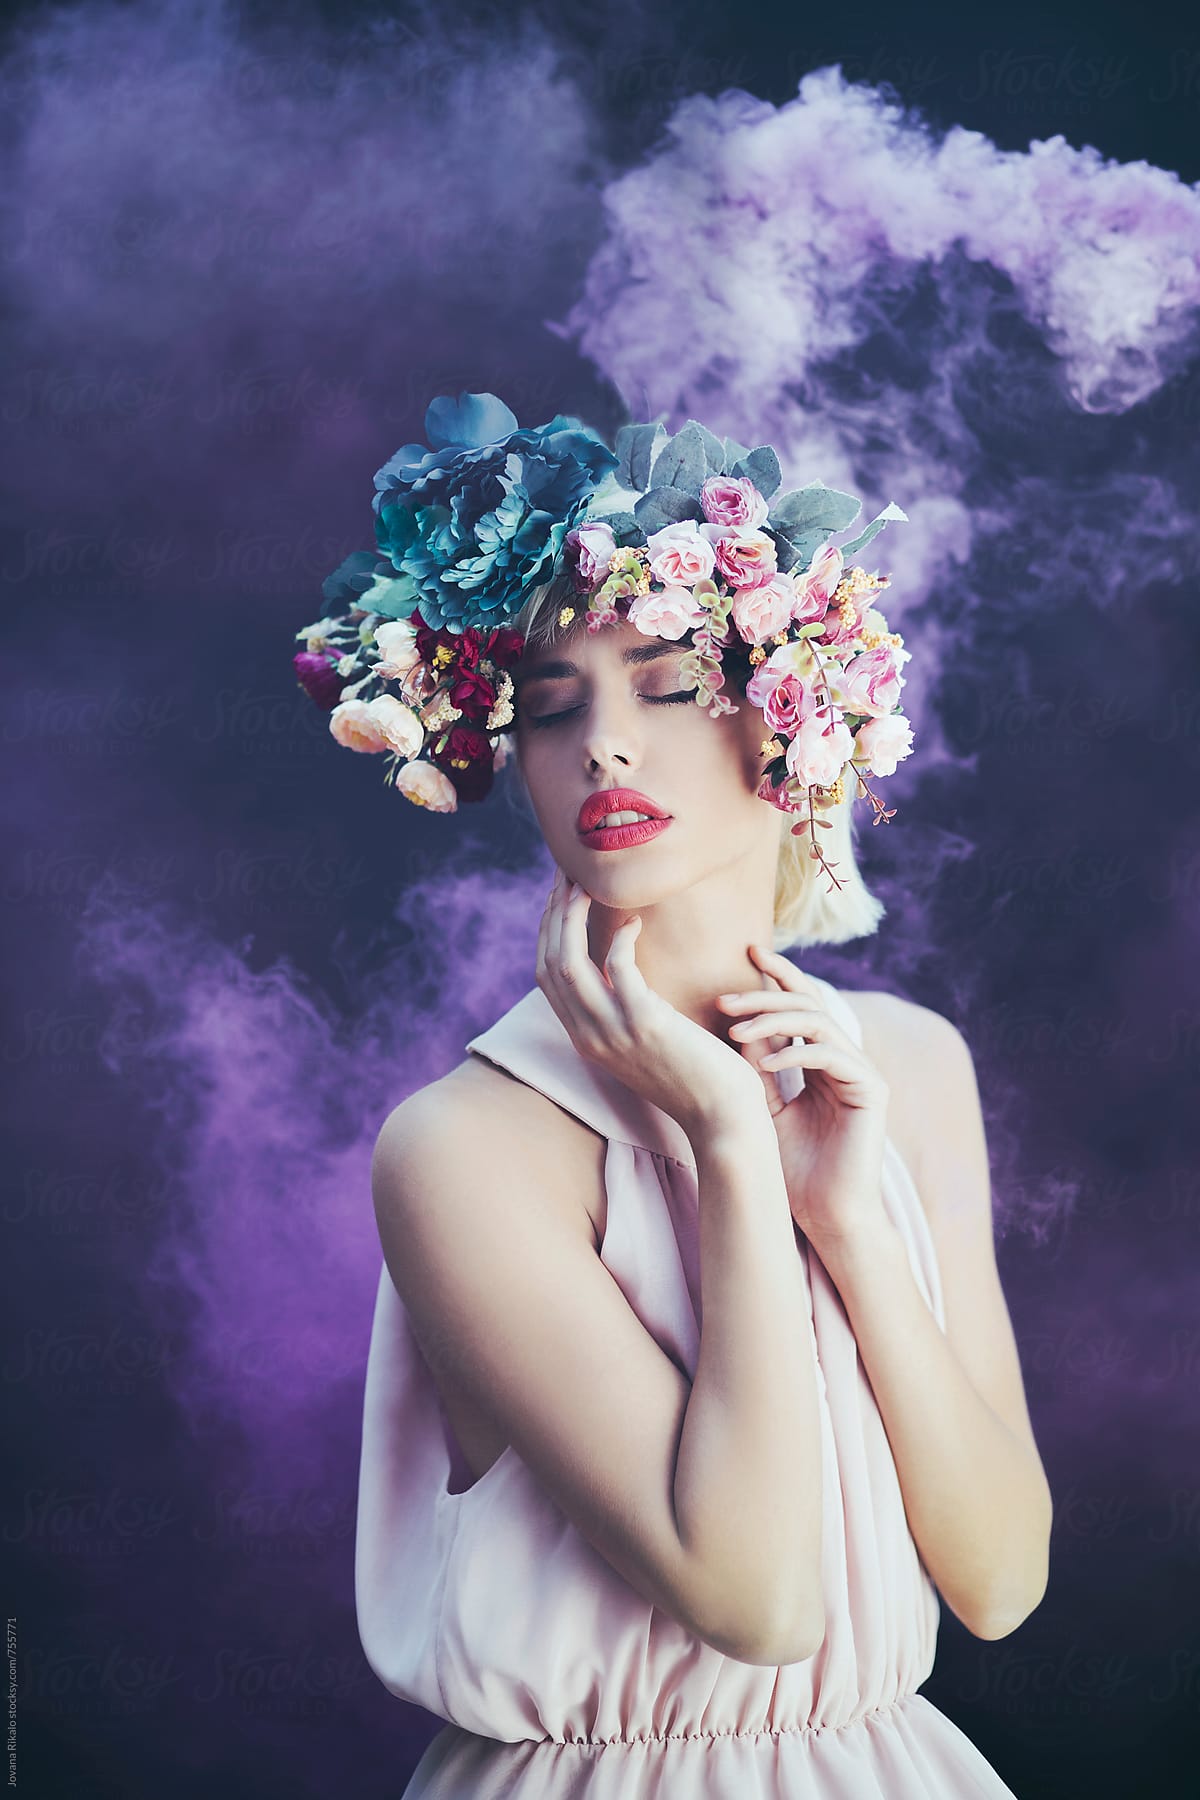 Artistic portrait of a young woman with smoke bomb